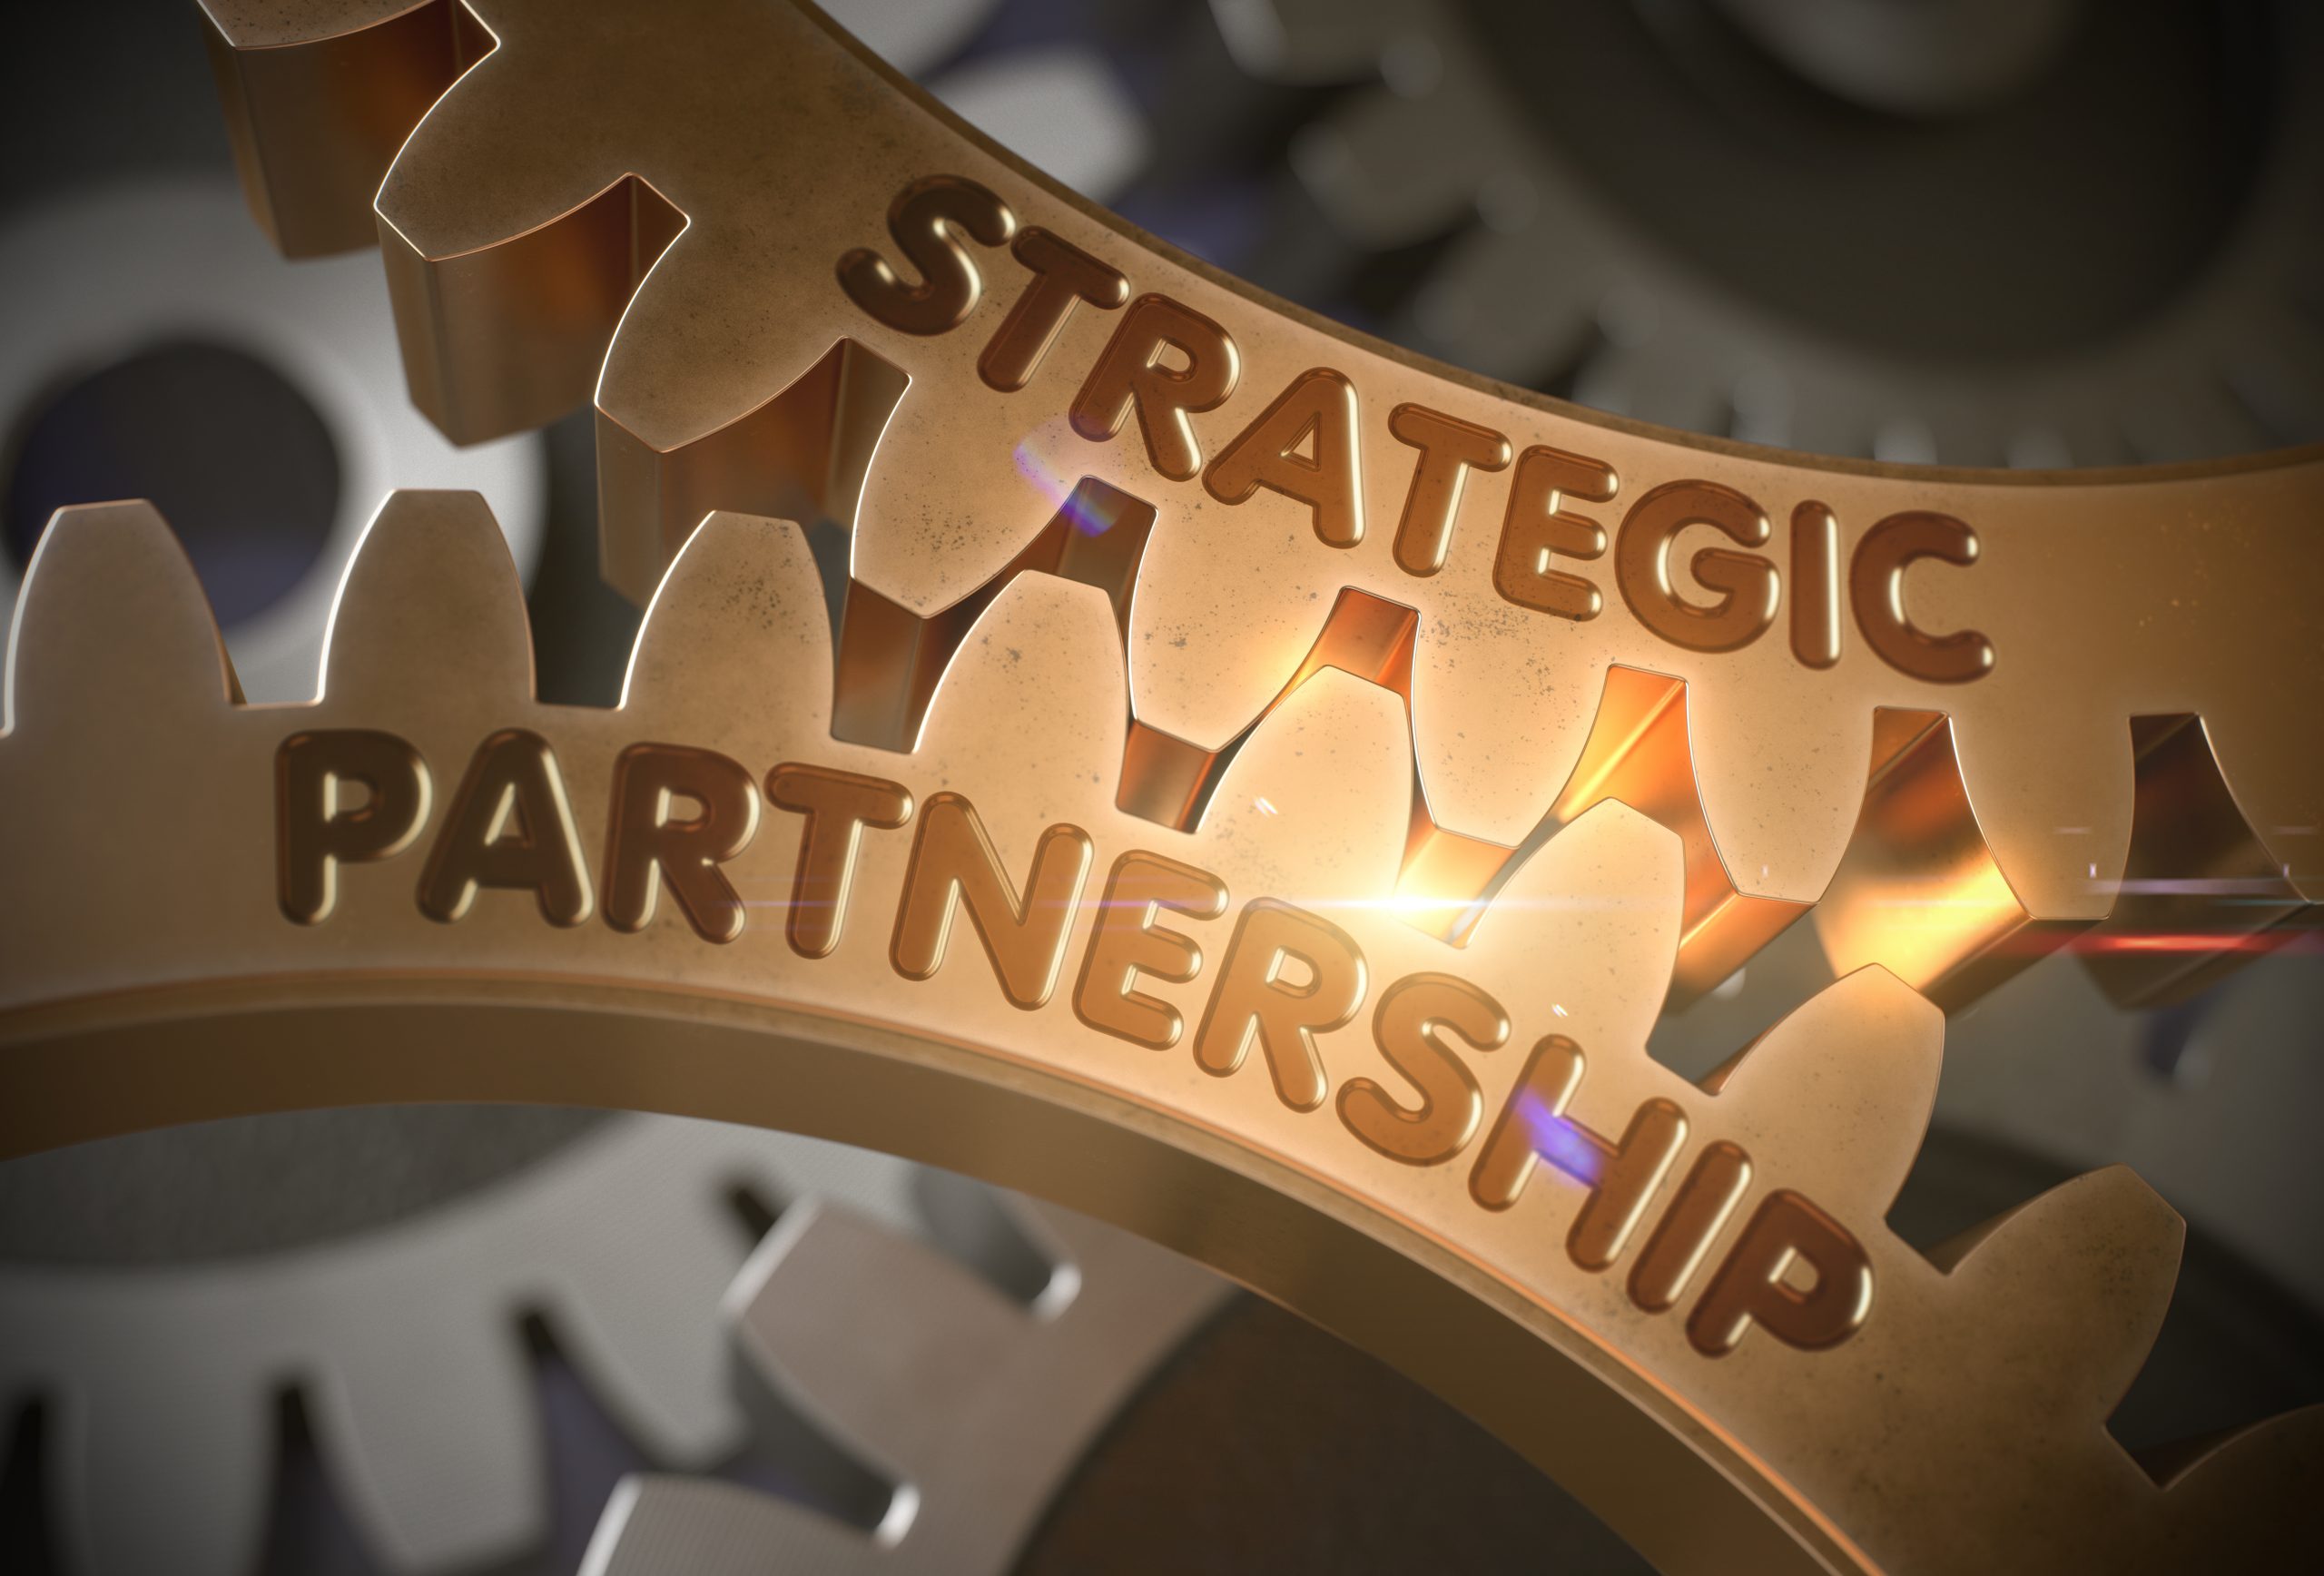 Strategic Partnership to increase roofing leads